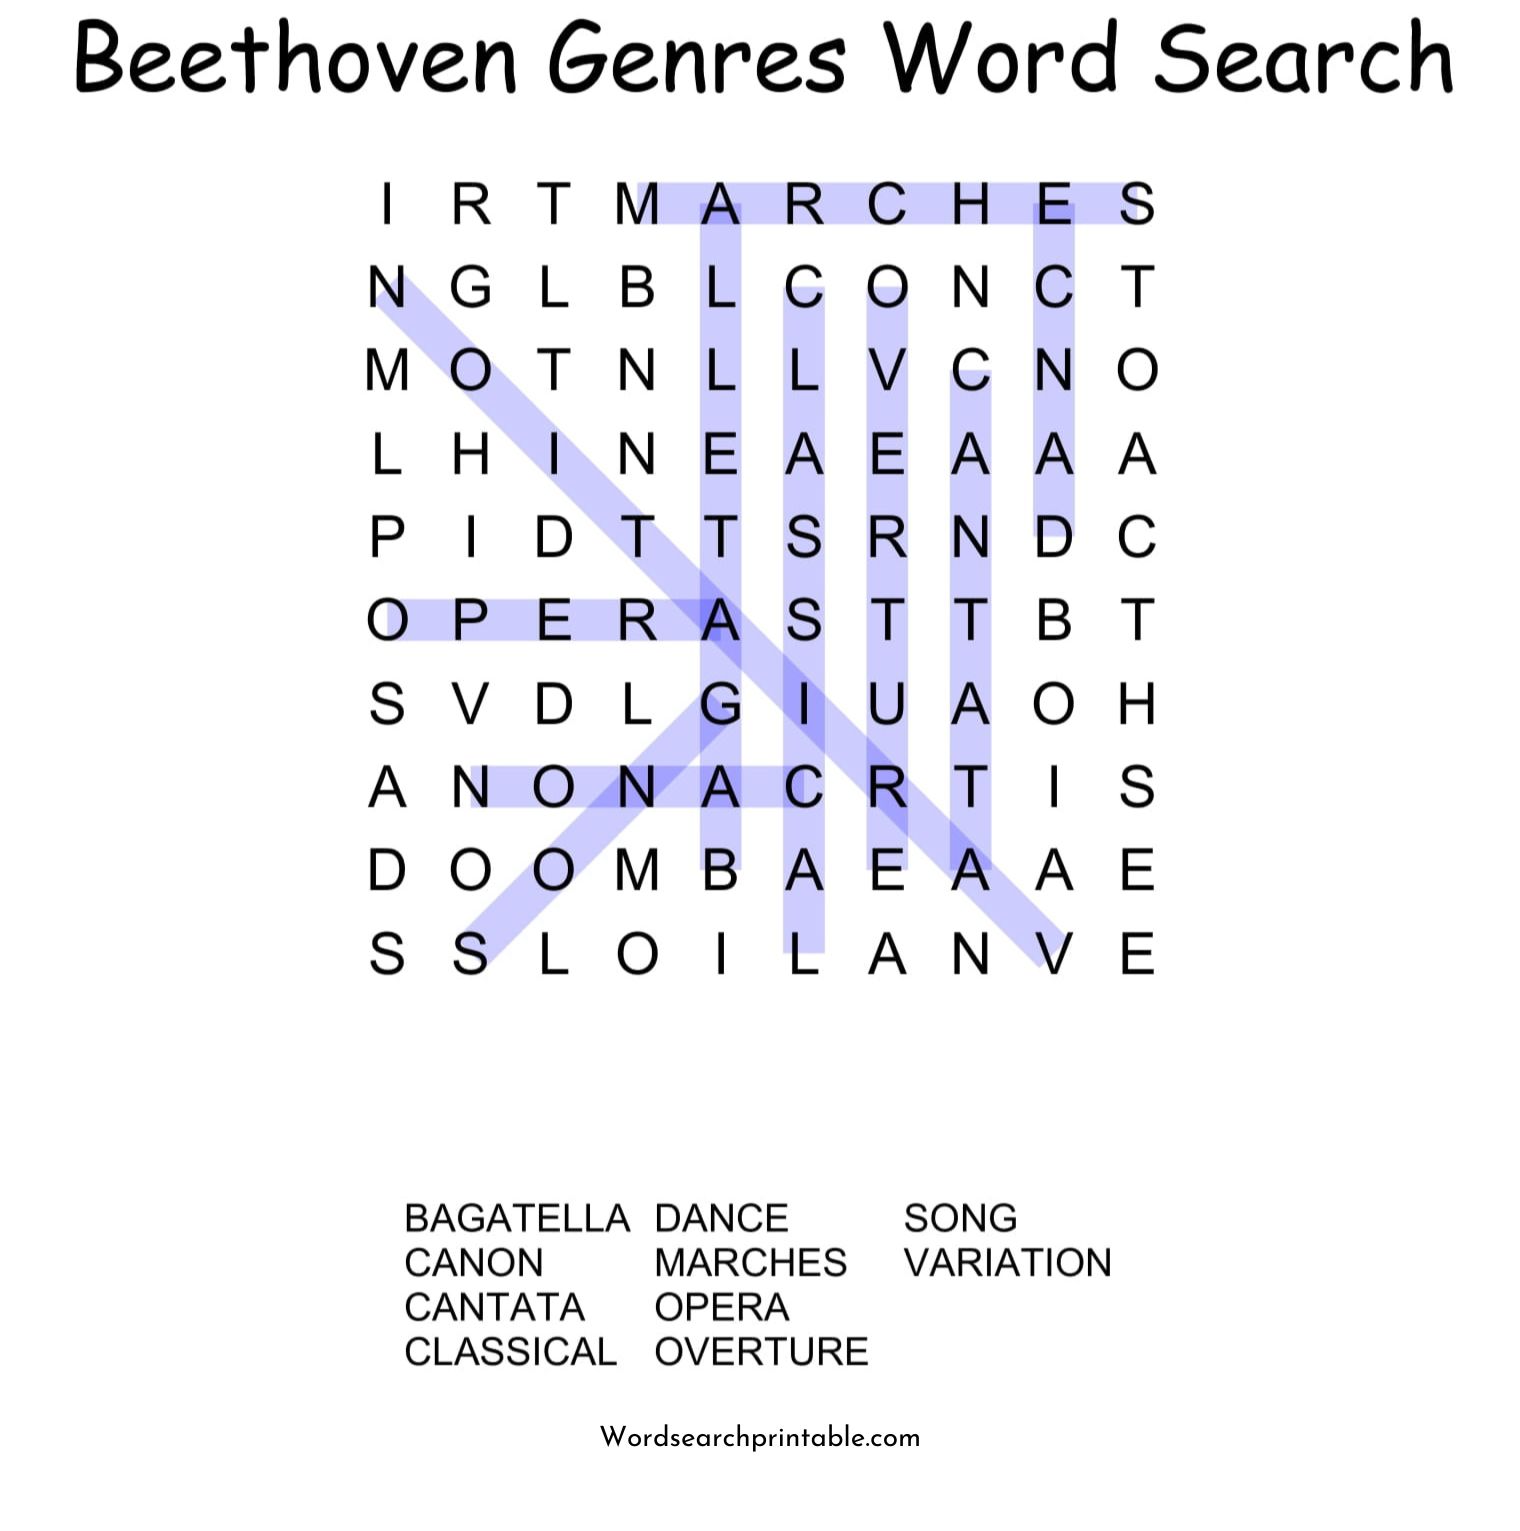 beethoven genres word search puzzle solution